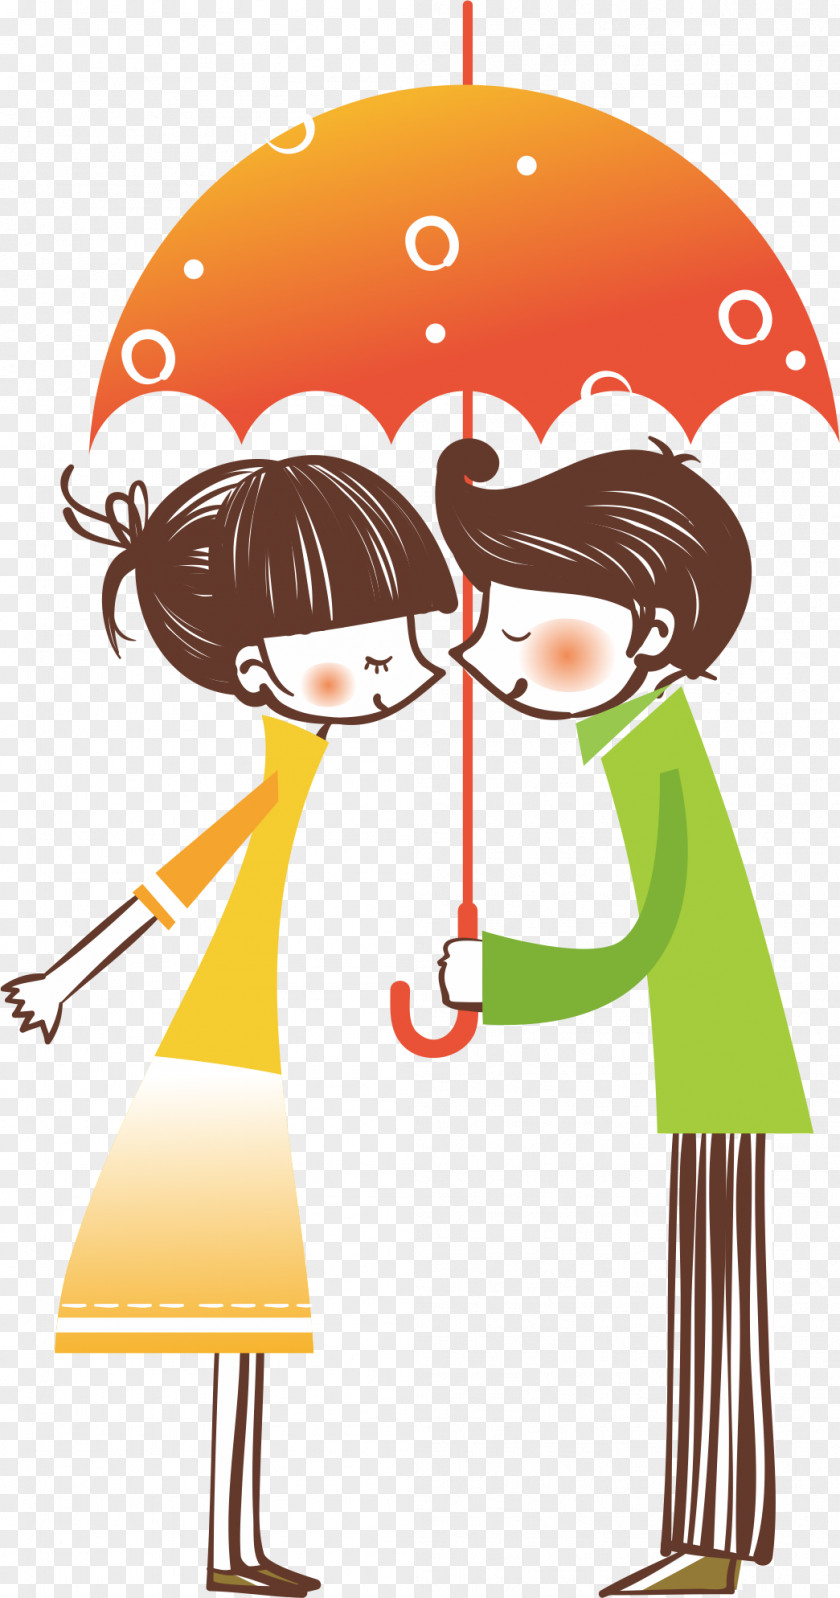 Love At First Sight Stock Illustration PNG